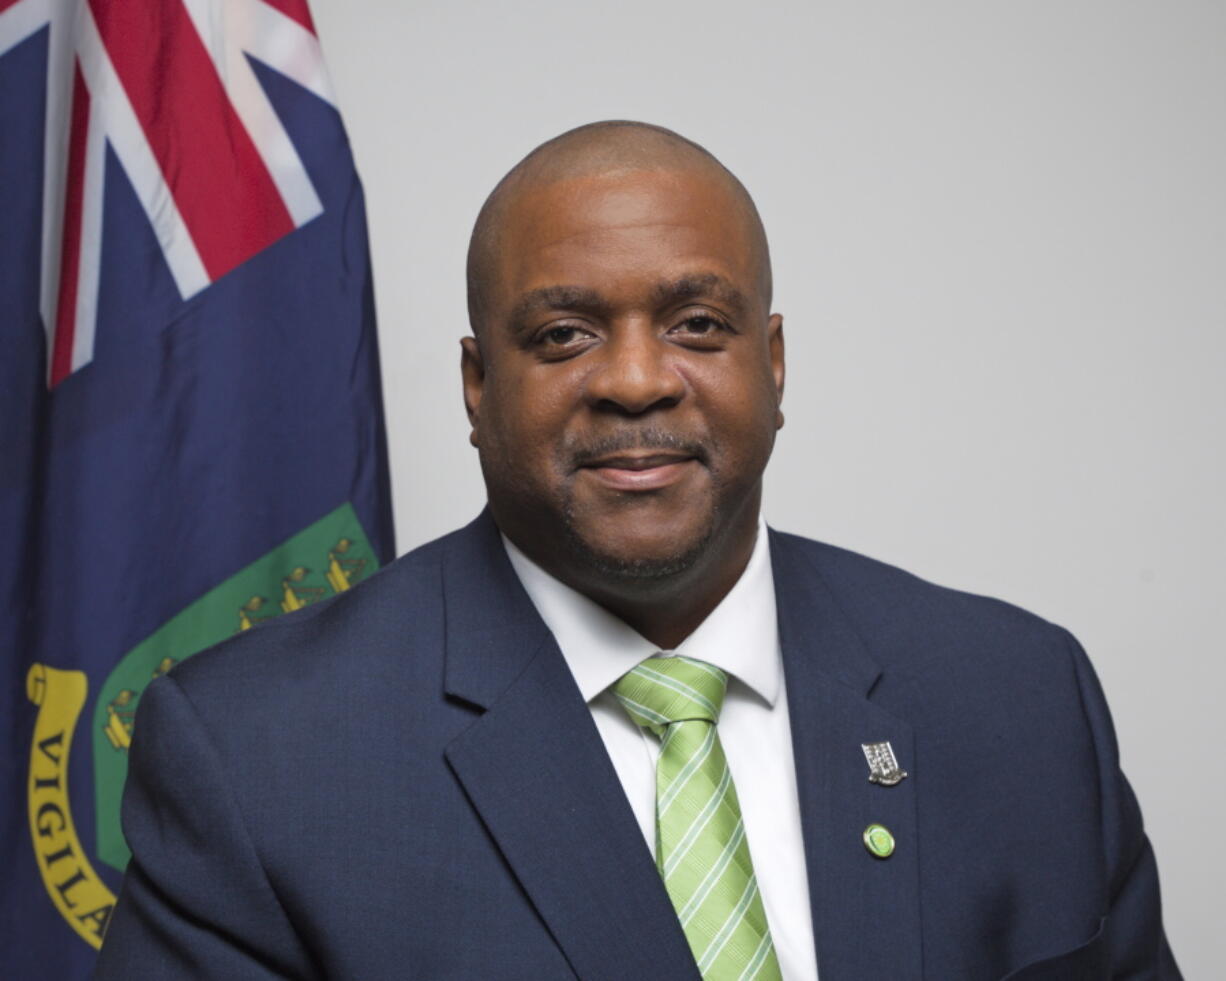 This photo released by the Department of Information and Public Relations of the government of the British Virgin Islands on April 22, 2022 shows British Virgin Island Premier Andrew Alturo Fahie. Fahie and the director of the Caribbean territory's ports were scheduled to appear in federal court in Miami on Friday, April 29, 2022 after their arrest on drug smuggling charges in a sting set up by the U.S. Drug Enforcement Administration.